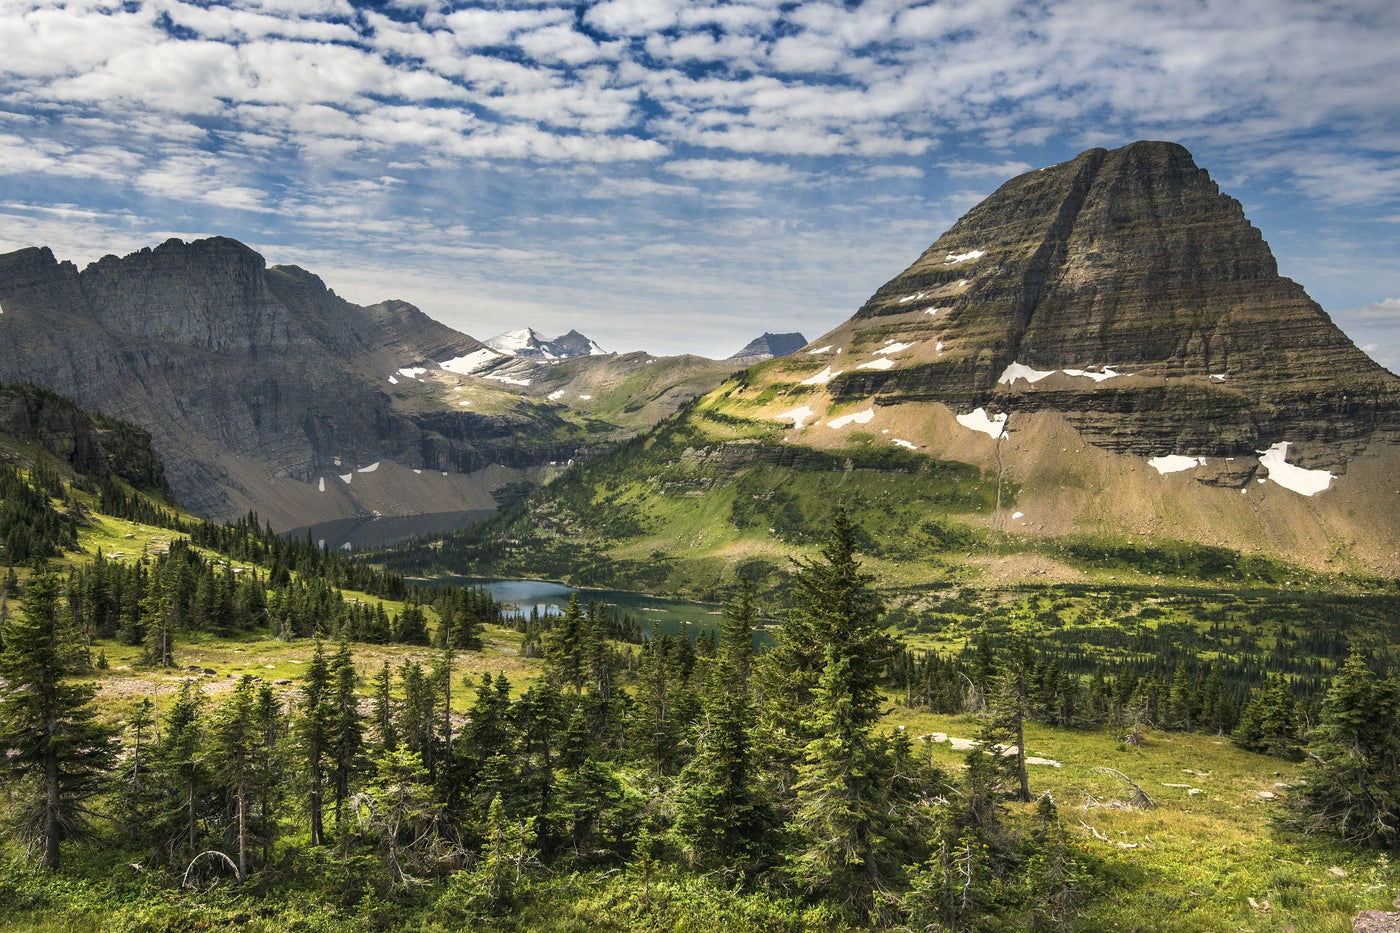 View of green trees and snowy mountains at Glacier National Park.